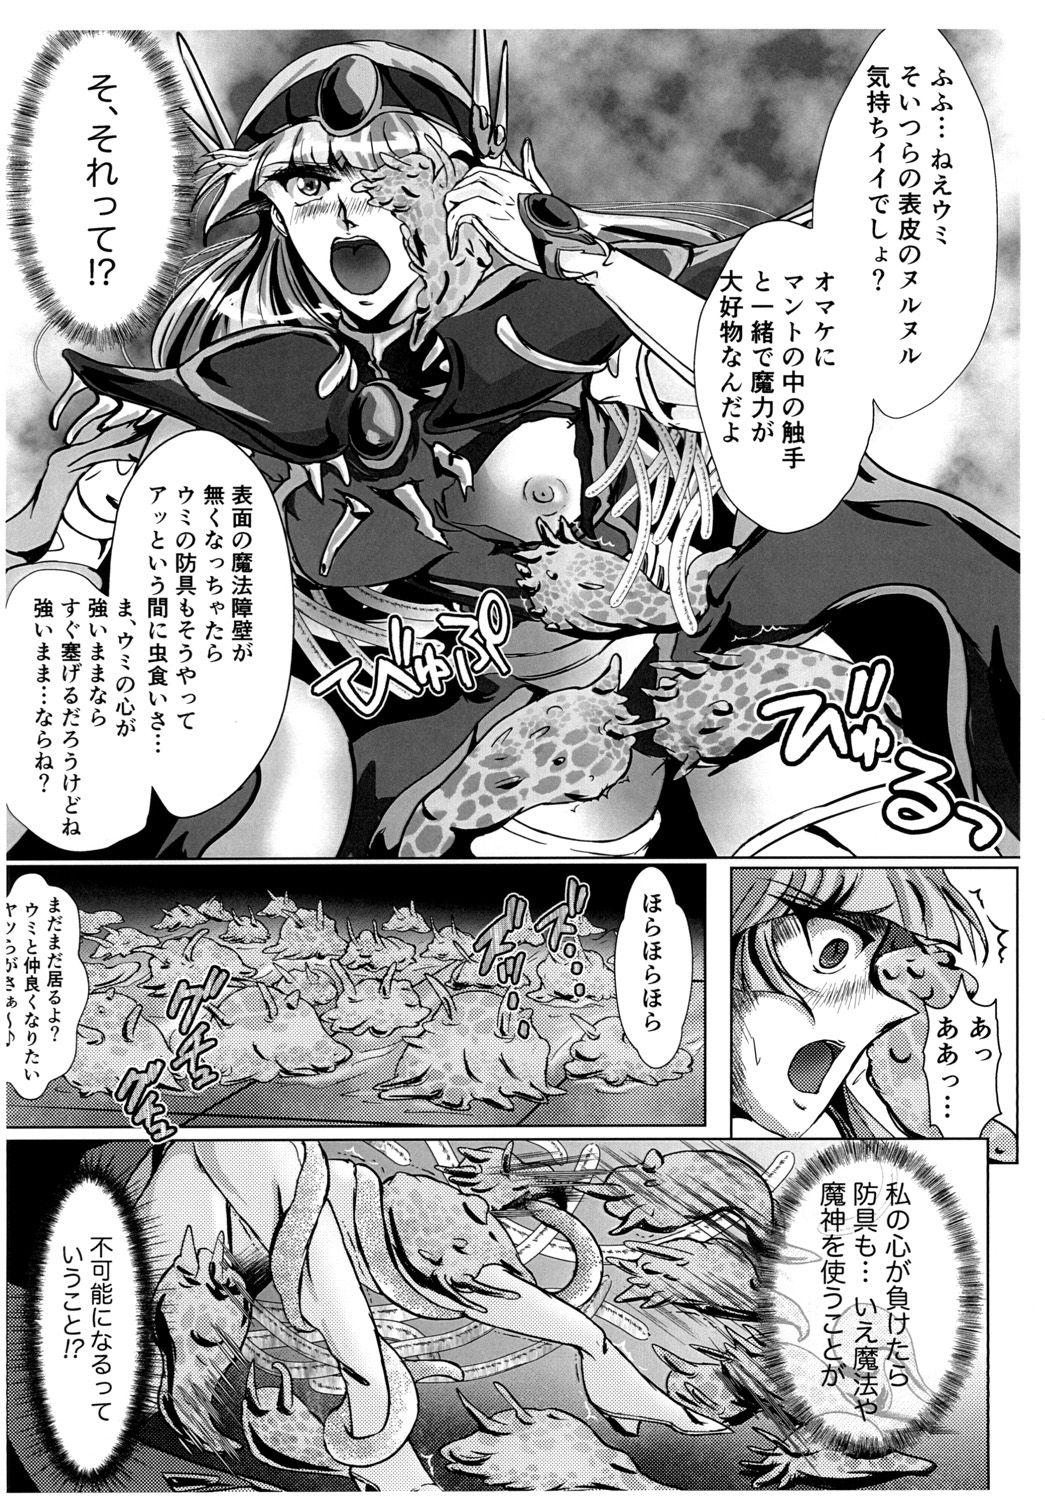 Rough Porn DARK TEMPEST U-ACT 02 - Magic knight rayearth Foursome - Page 12